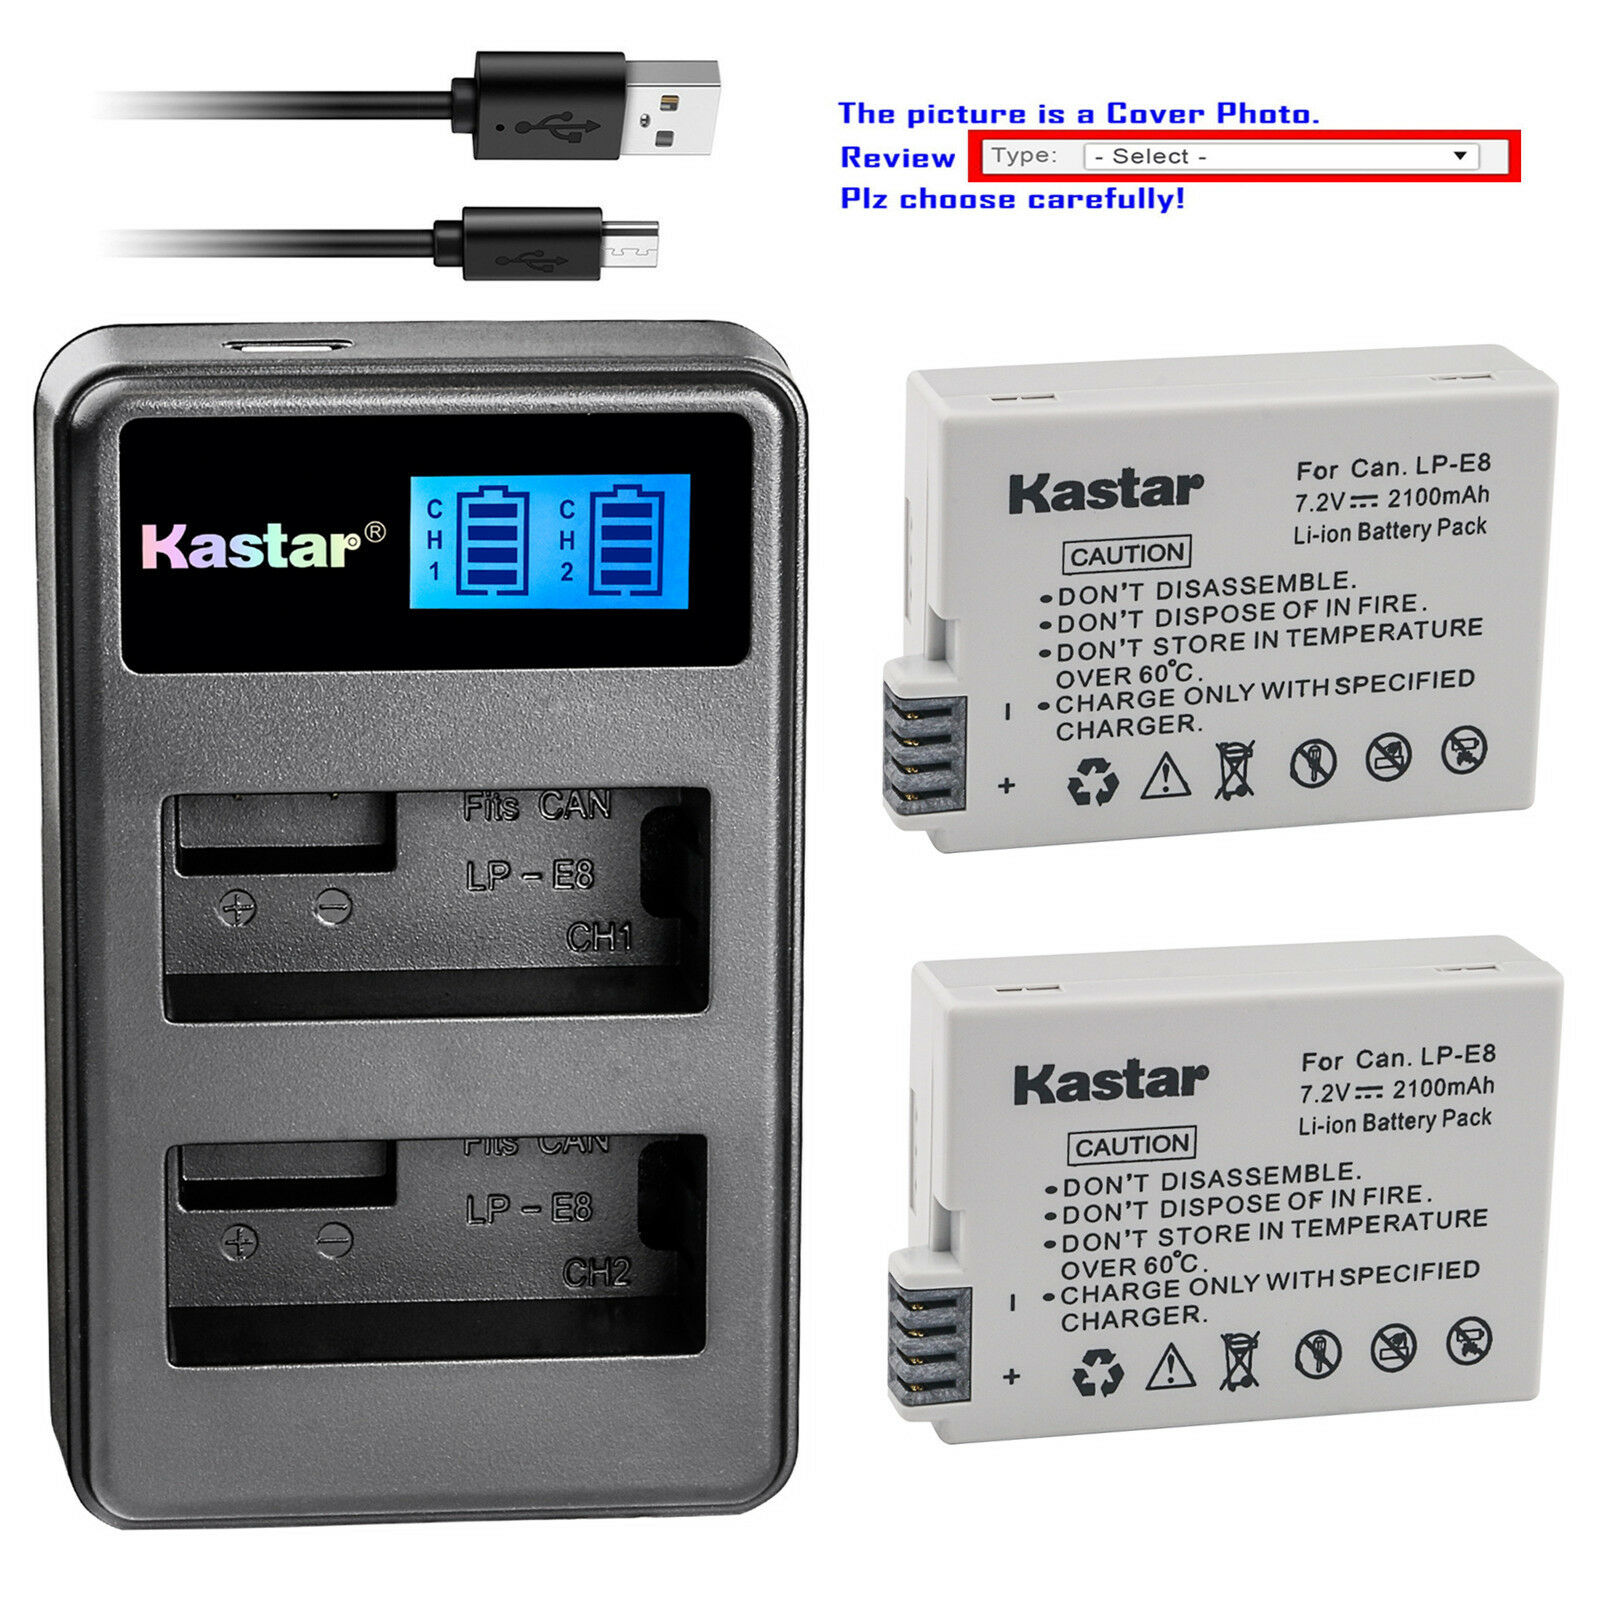 Kastar Lp-e8 Lpe8 Battery Charger For Canon Eos Rebel T2i Eos Rebel T3i Camera